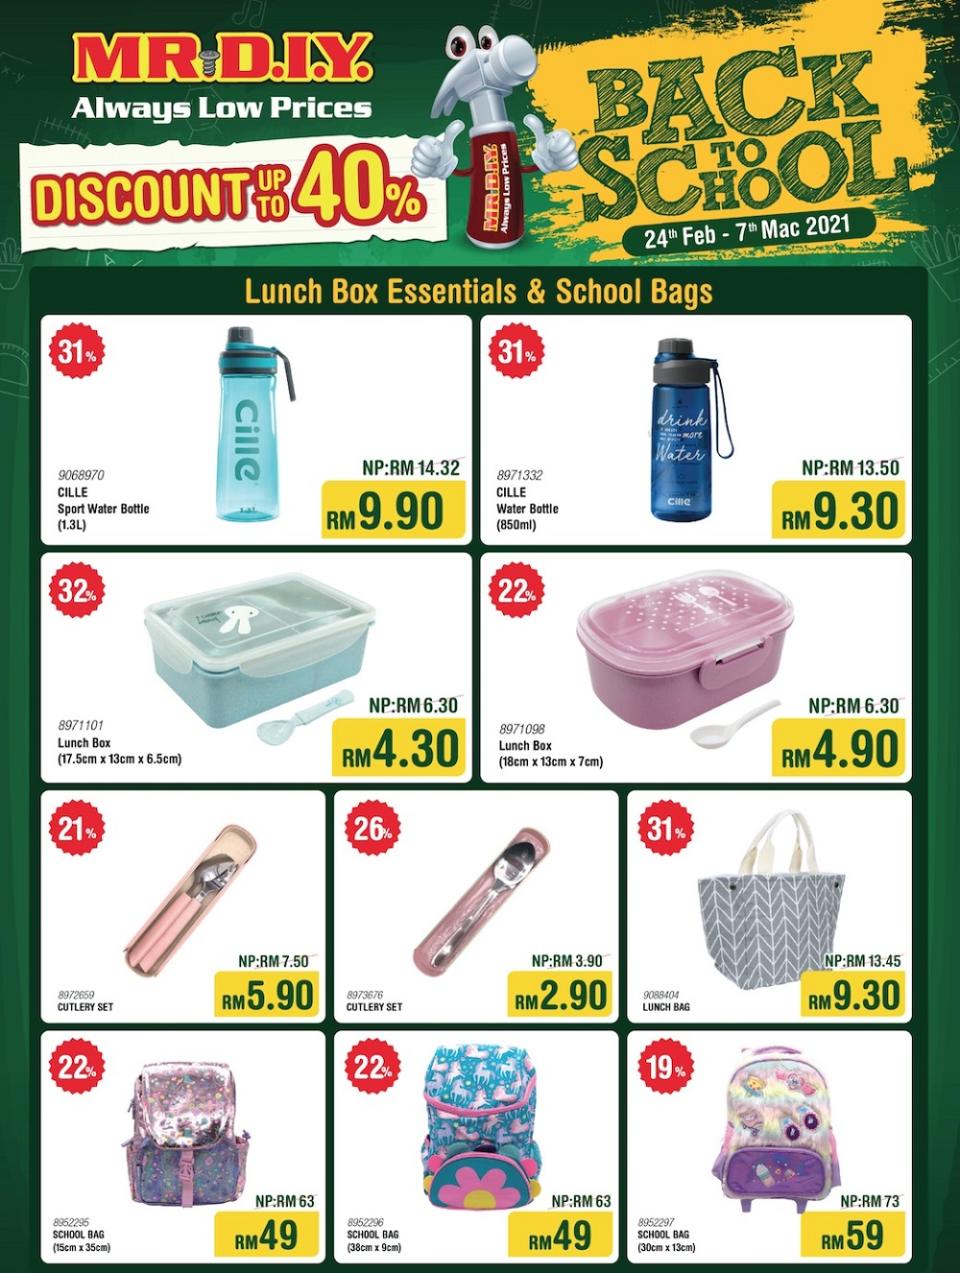 Don’t miss out on these massive savings at MR.DIY (flyer applicable for West Malaysia only). — Picture courtesy of MR.DIY